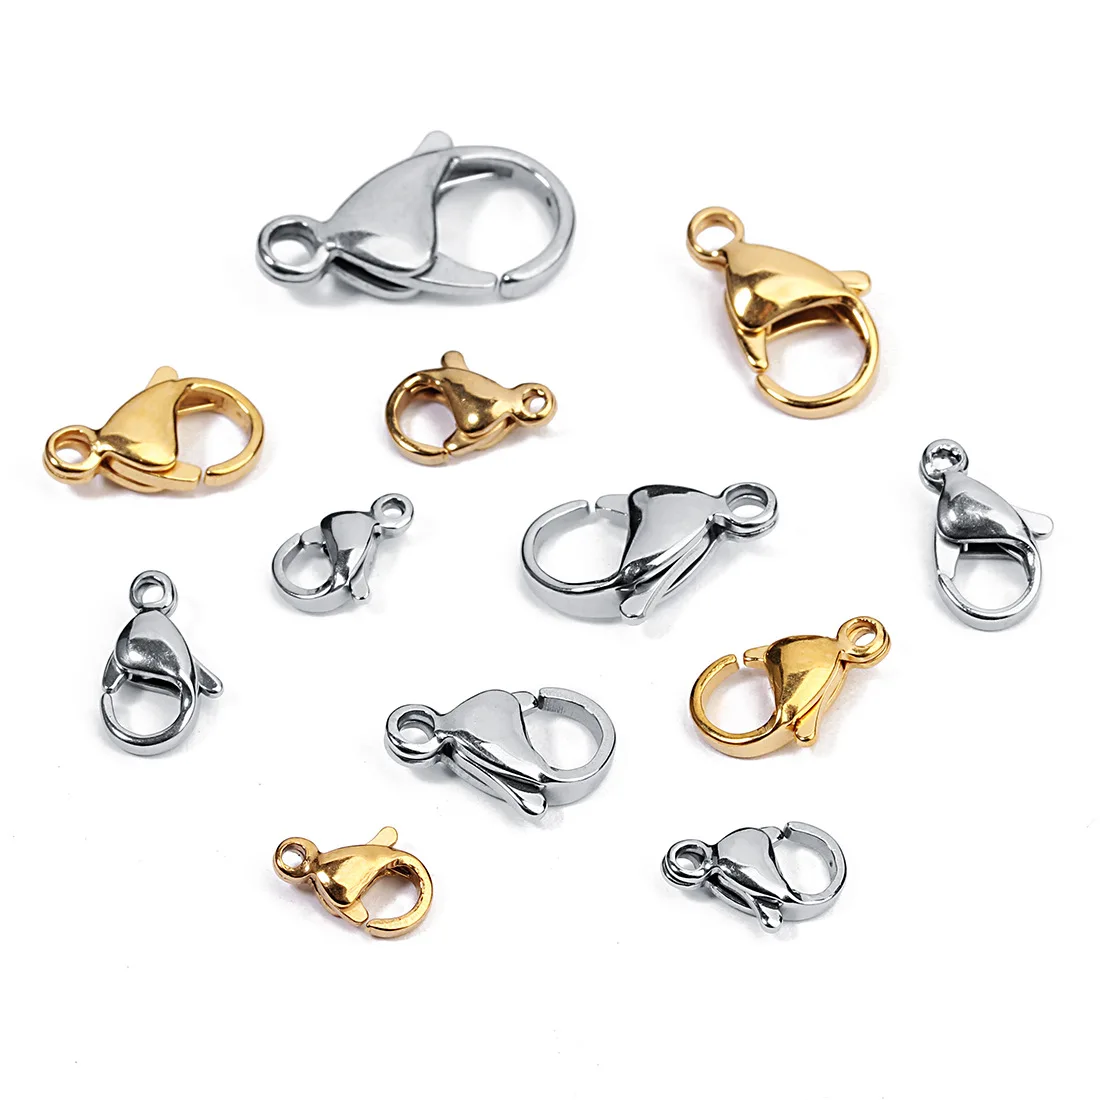 

Bracelet stainless steel jewlery findings dongguan component Metal clasp gold plated Lobster clasps for jewelry Bracelet making